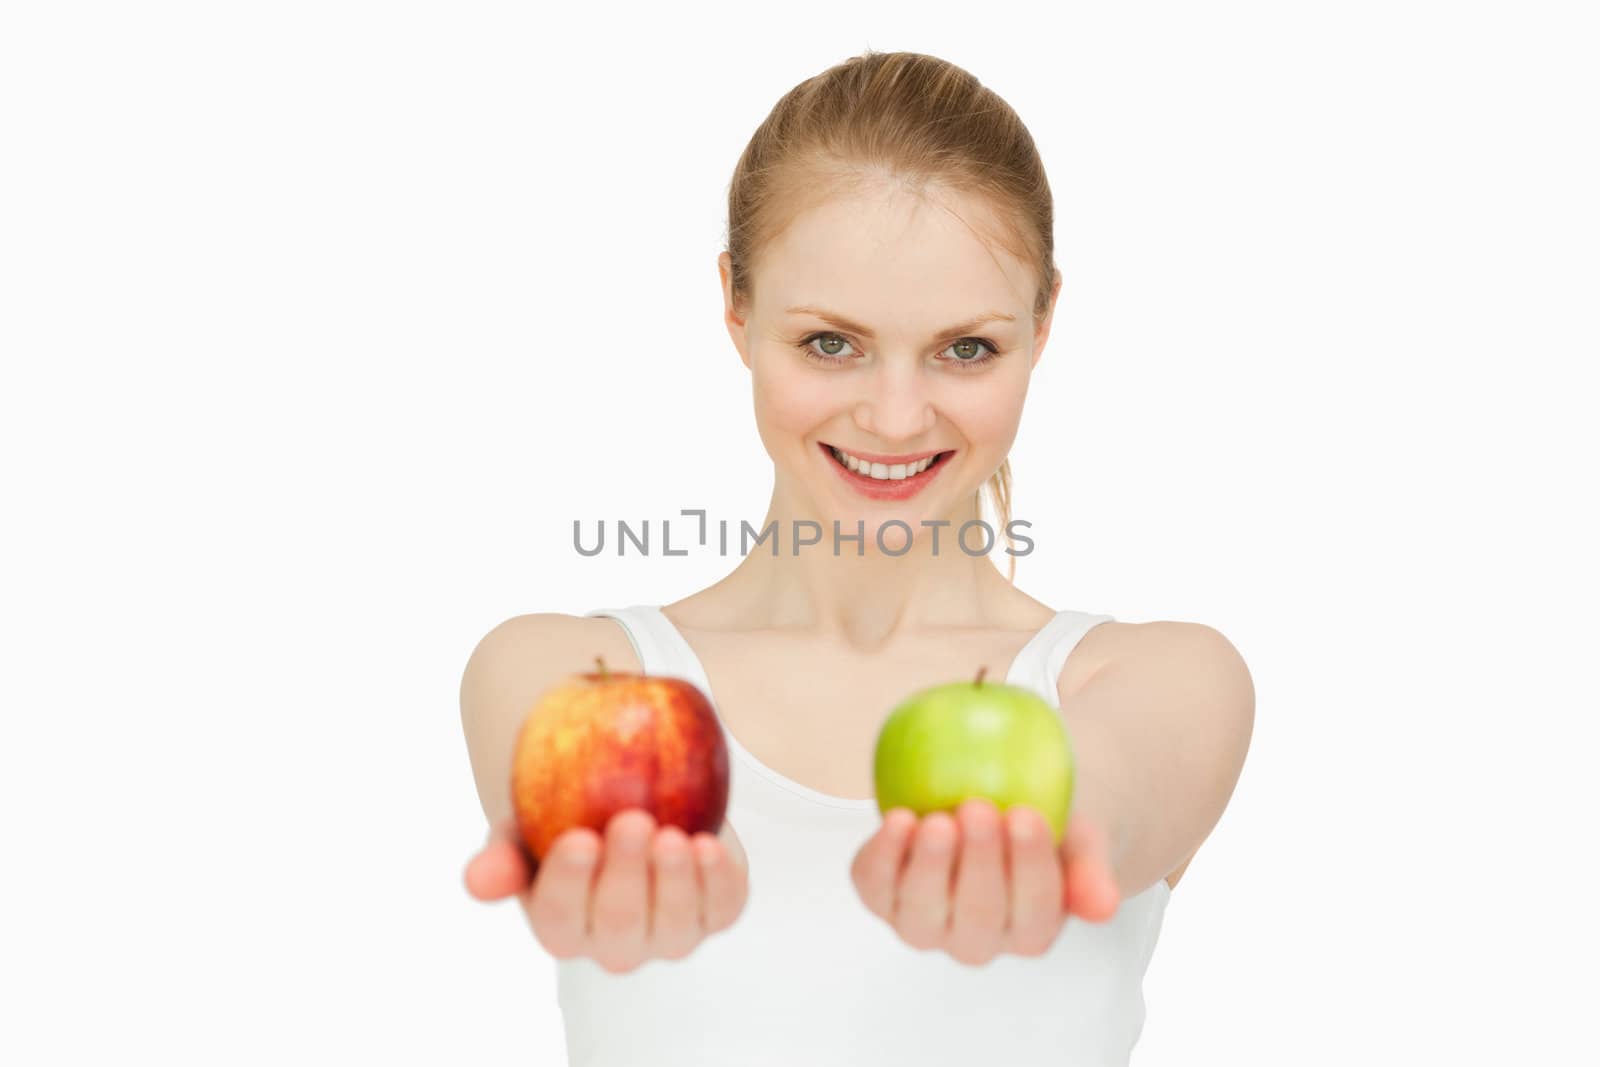 Smiling woman presenting two apples against white background